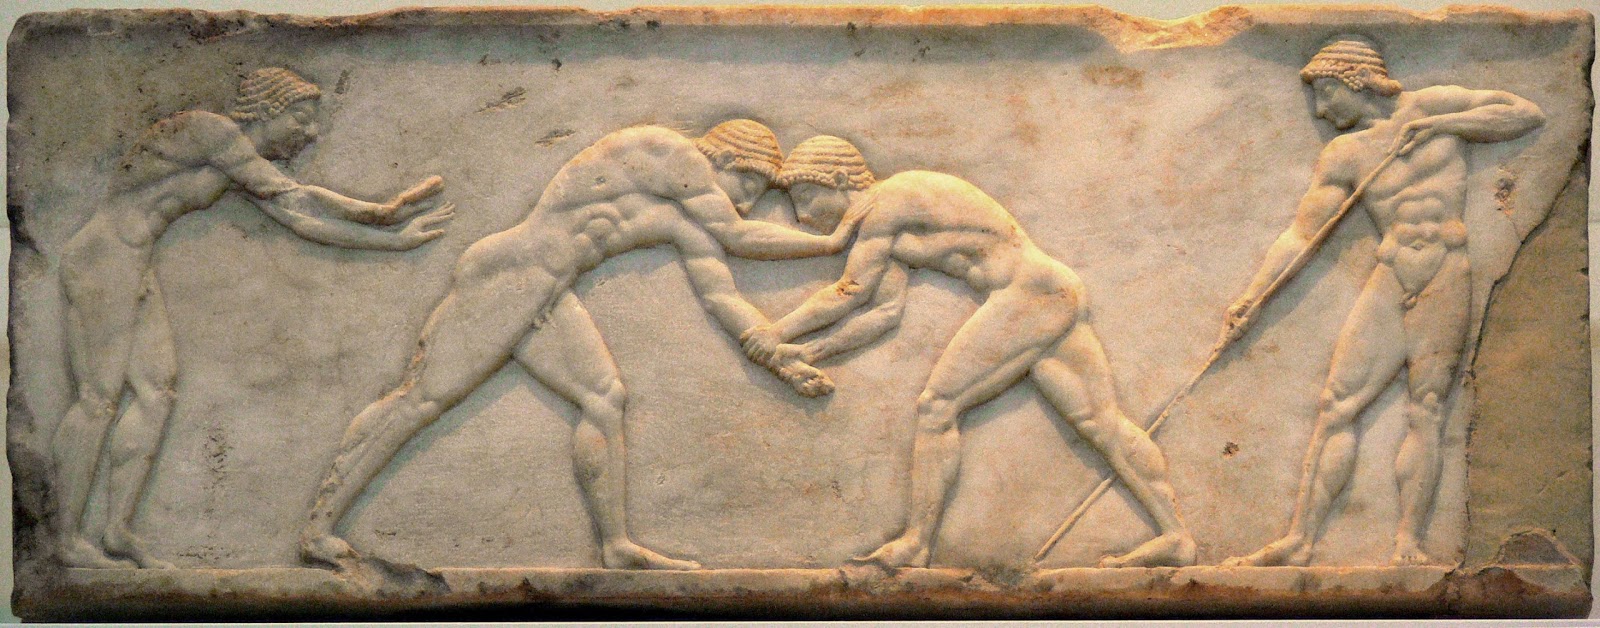 Olympic Games in Ancient Greece were Not Free of Corruption